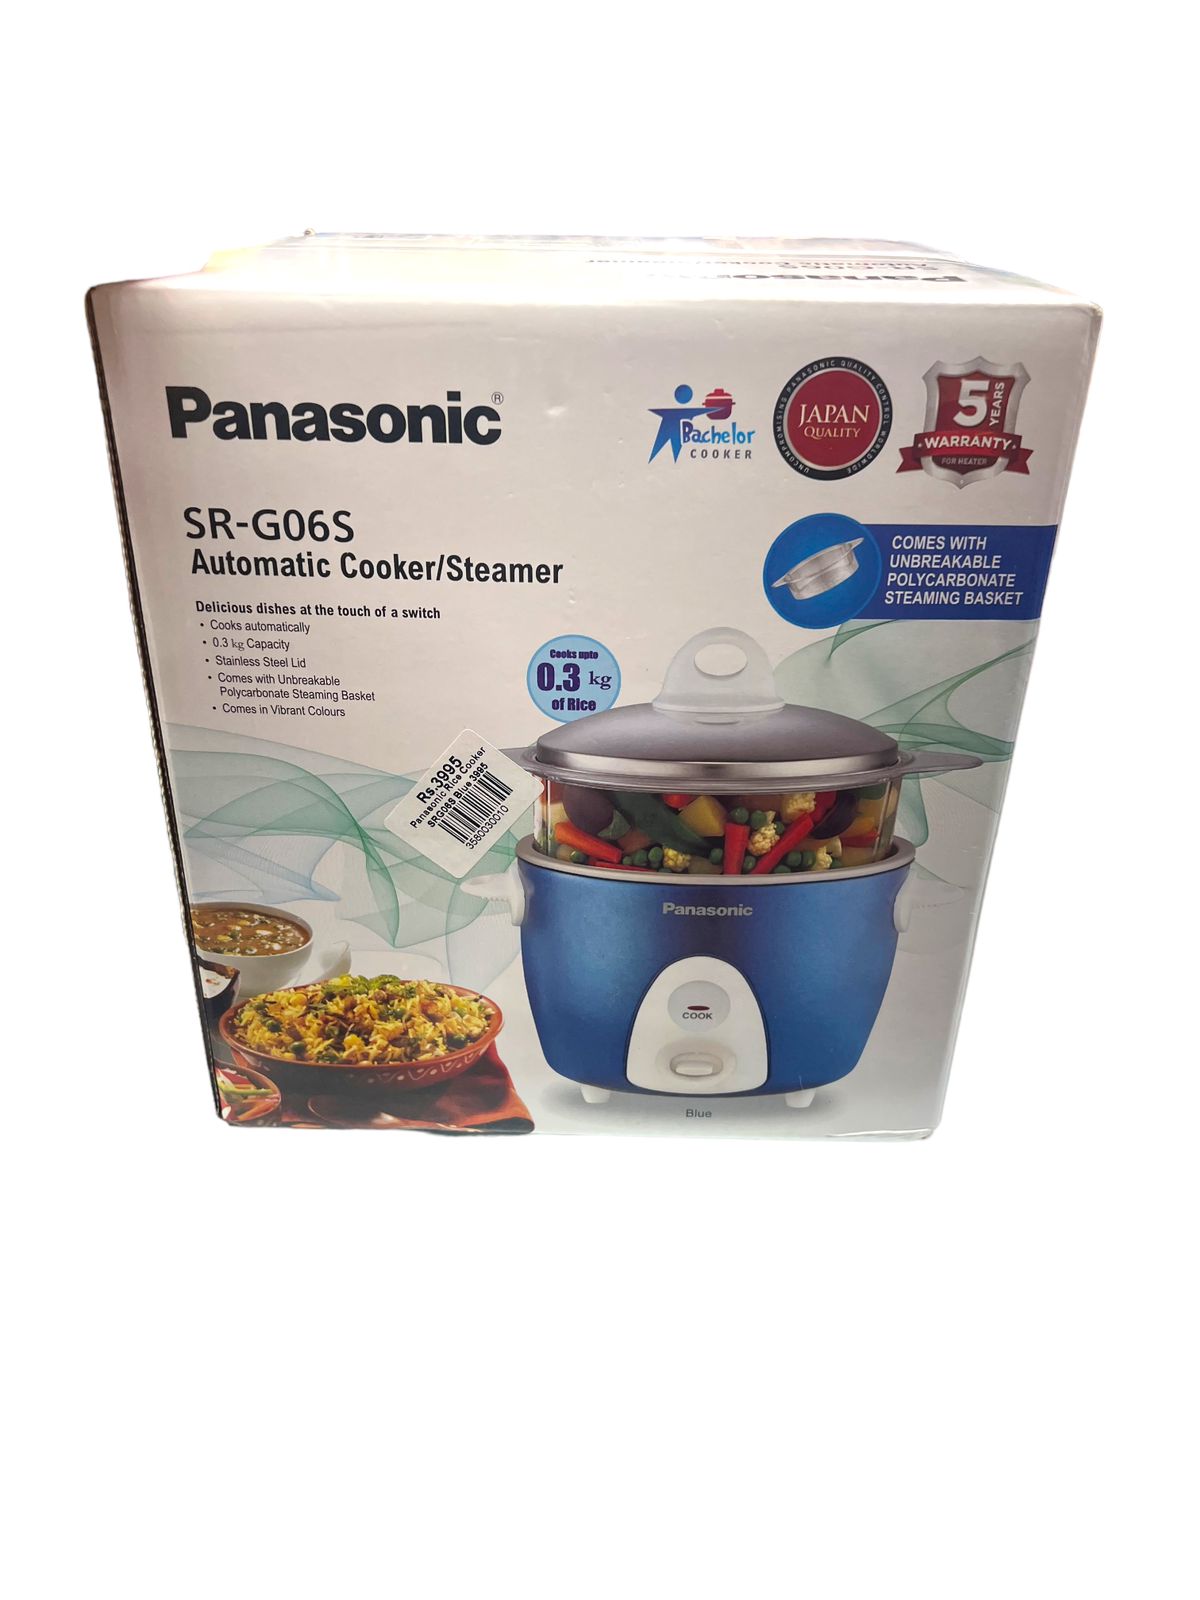 Panasonic Rice Cooker SR-G06S with steaming basket - Blue